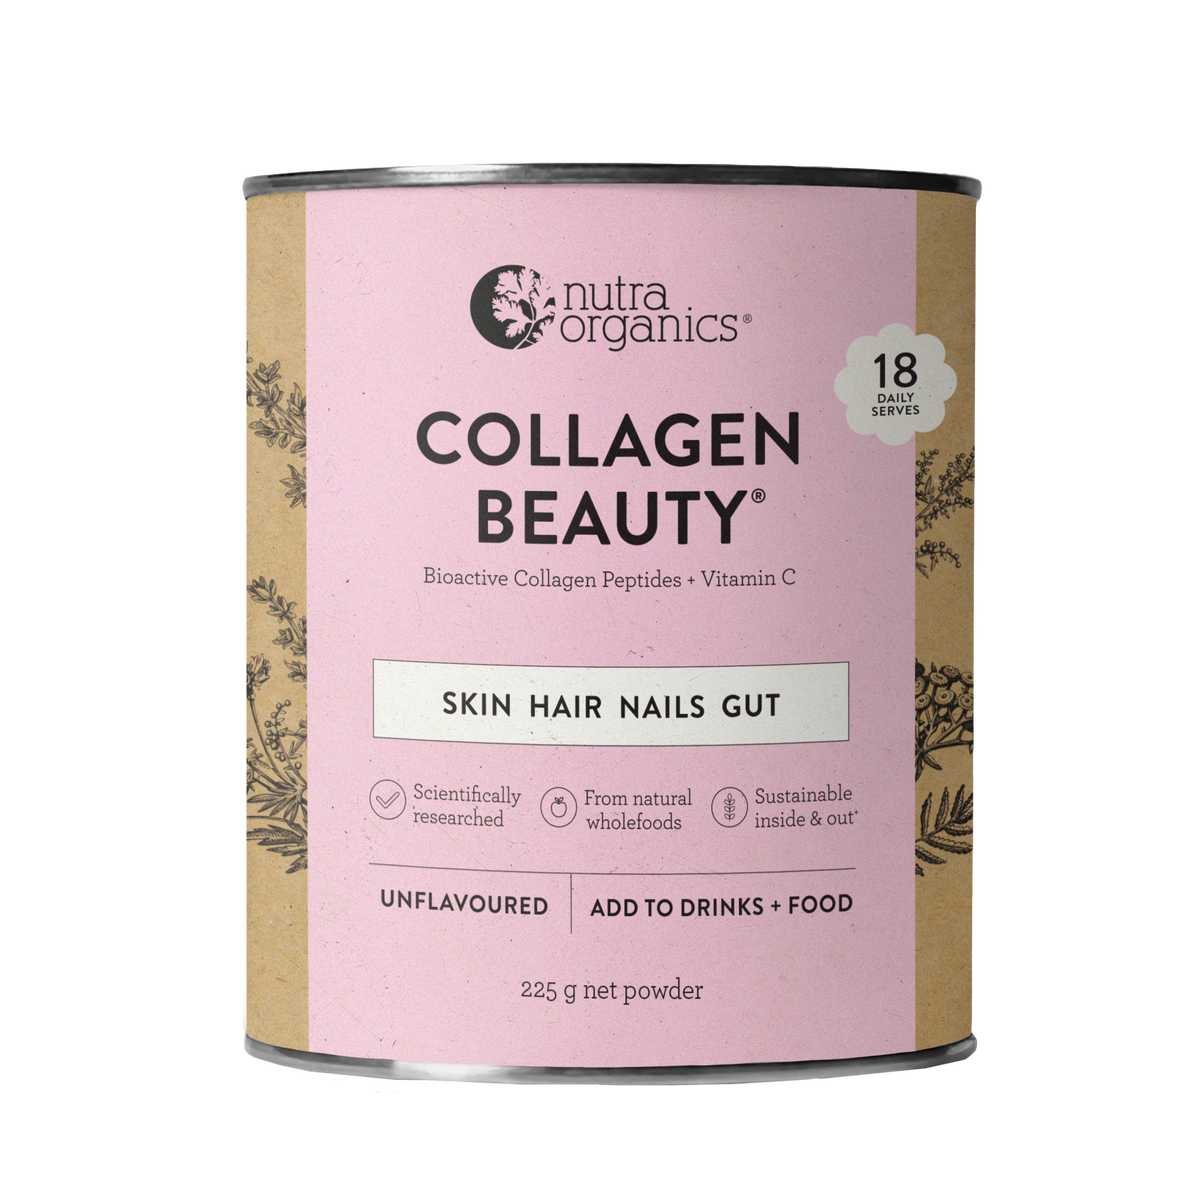 Nutra Organics Collagen Beauty Unflavored - 225g